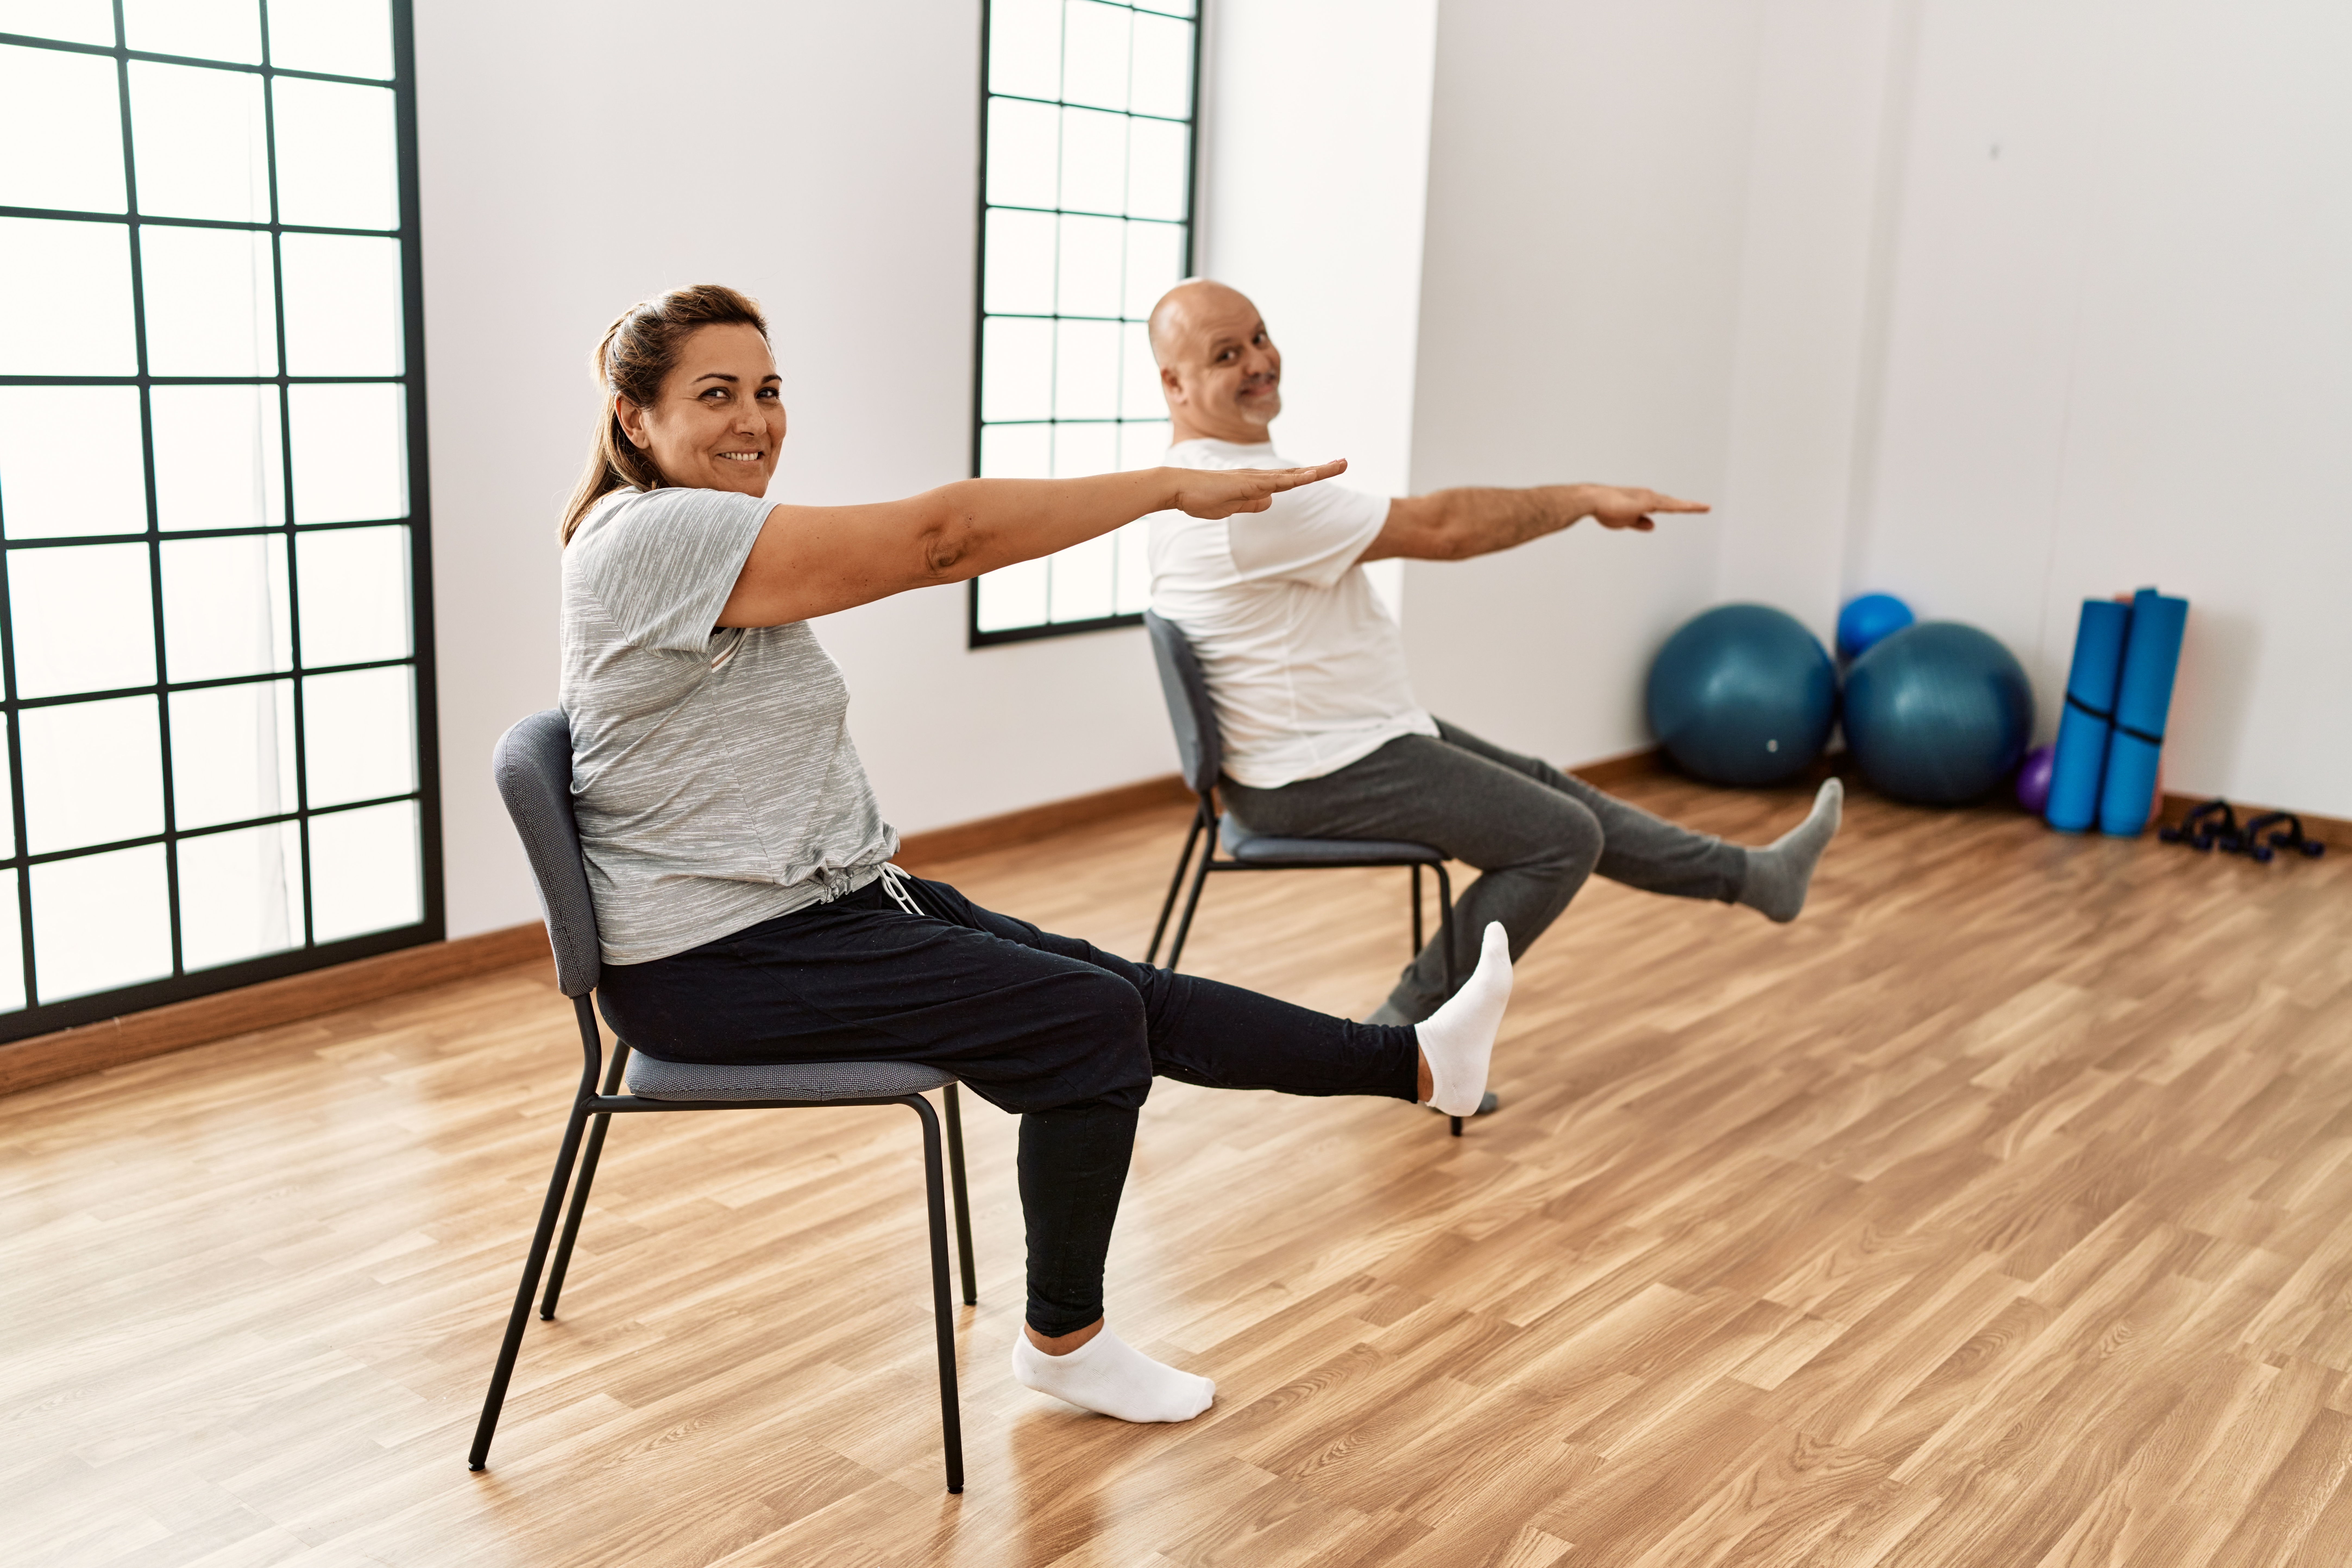 Two adults participate in Chair Yoga inside a studio